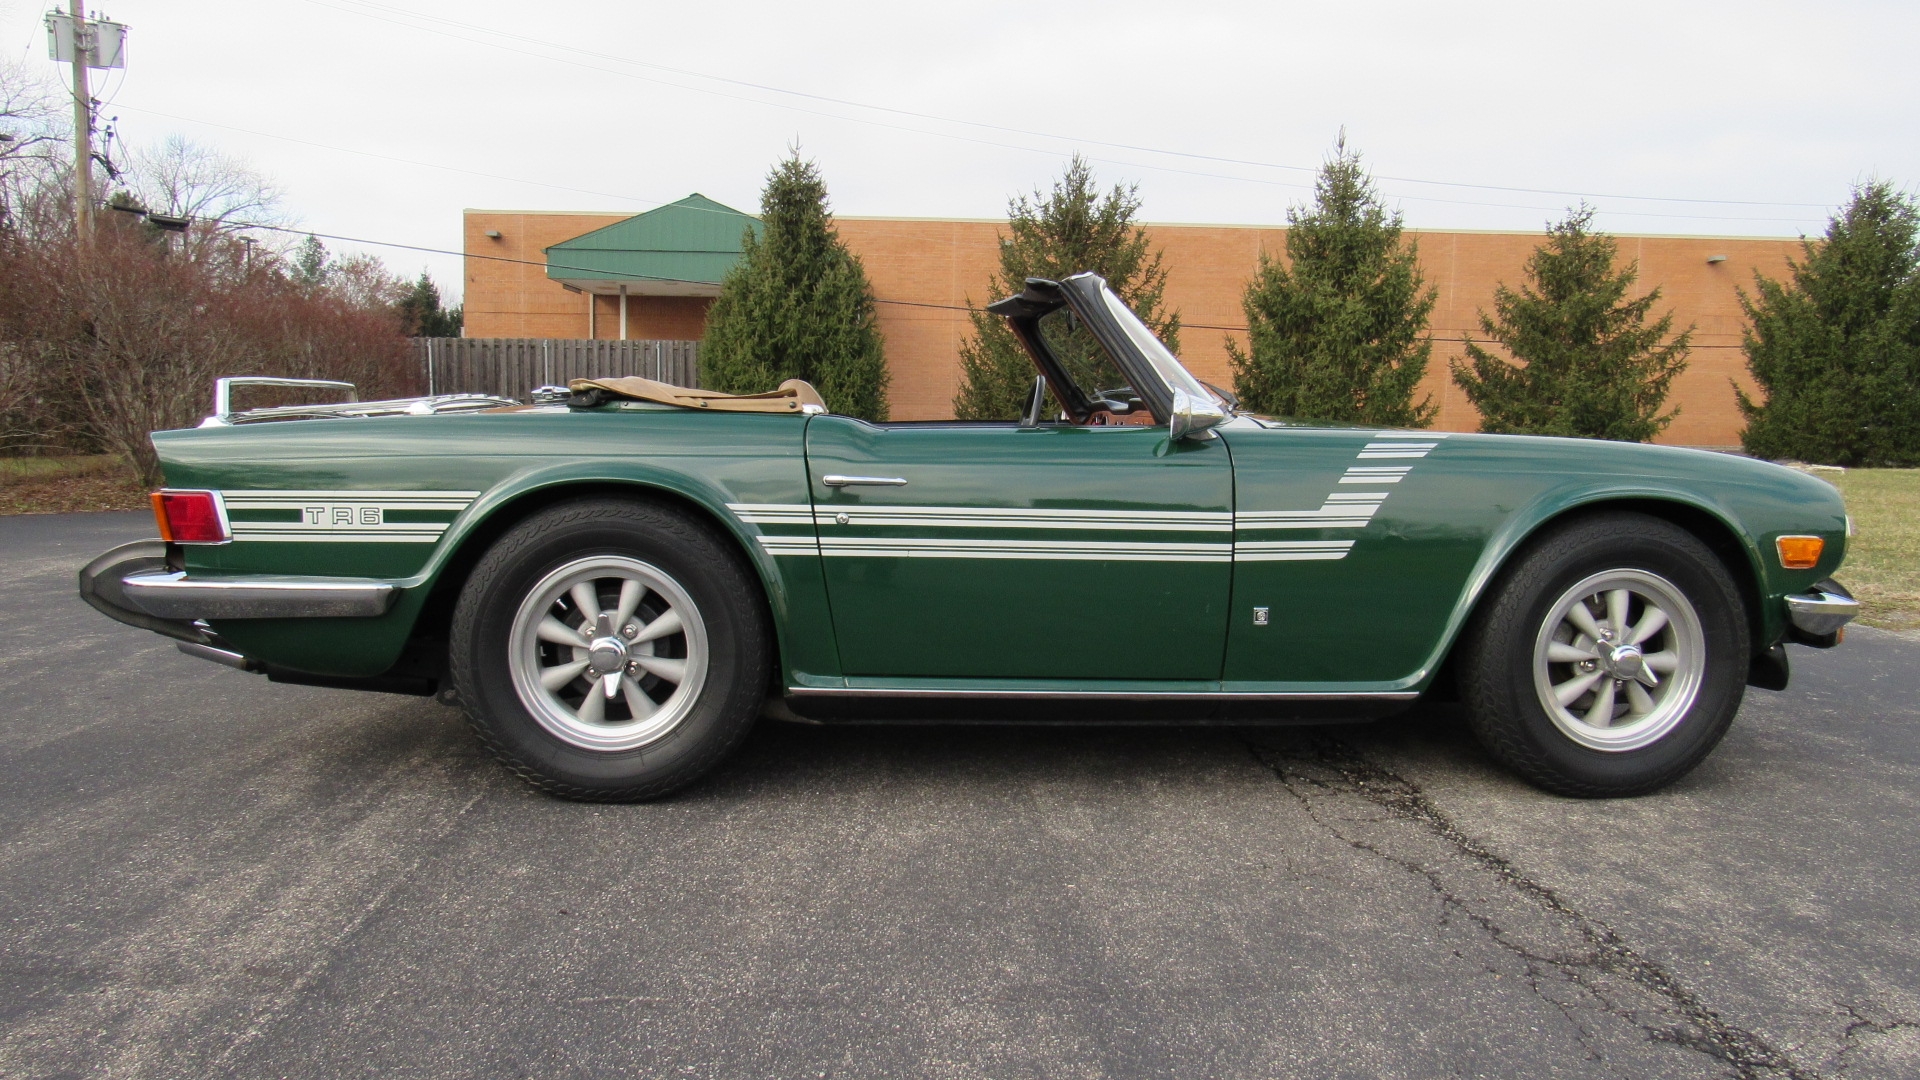 1976 TR6, Factory Overdrive, Factory Hardtop, SOLD!